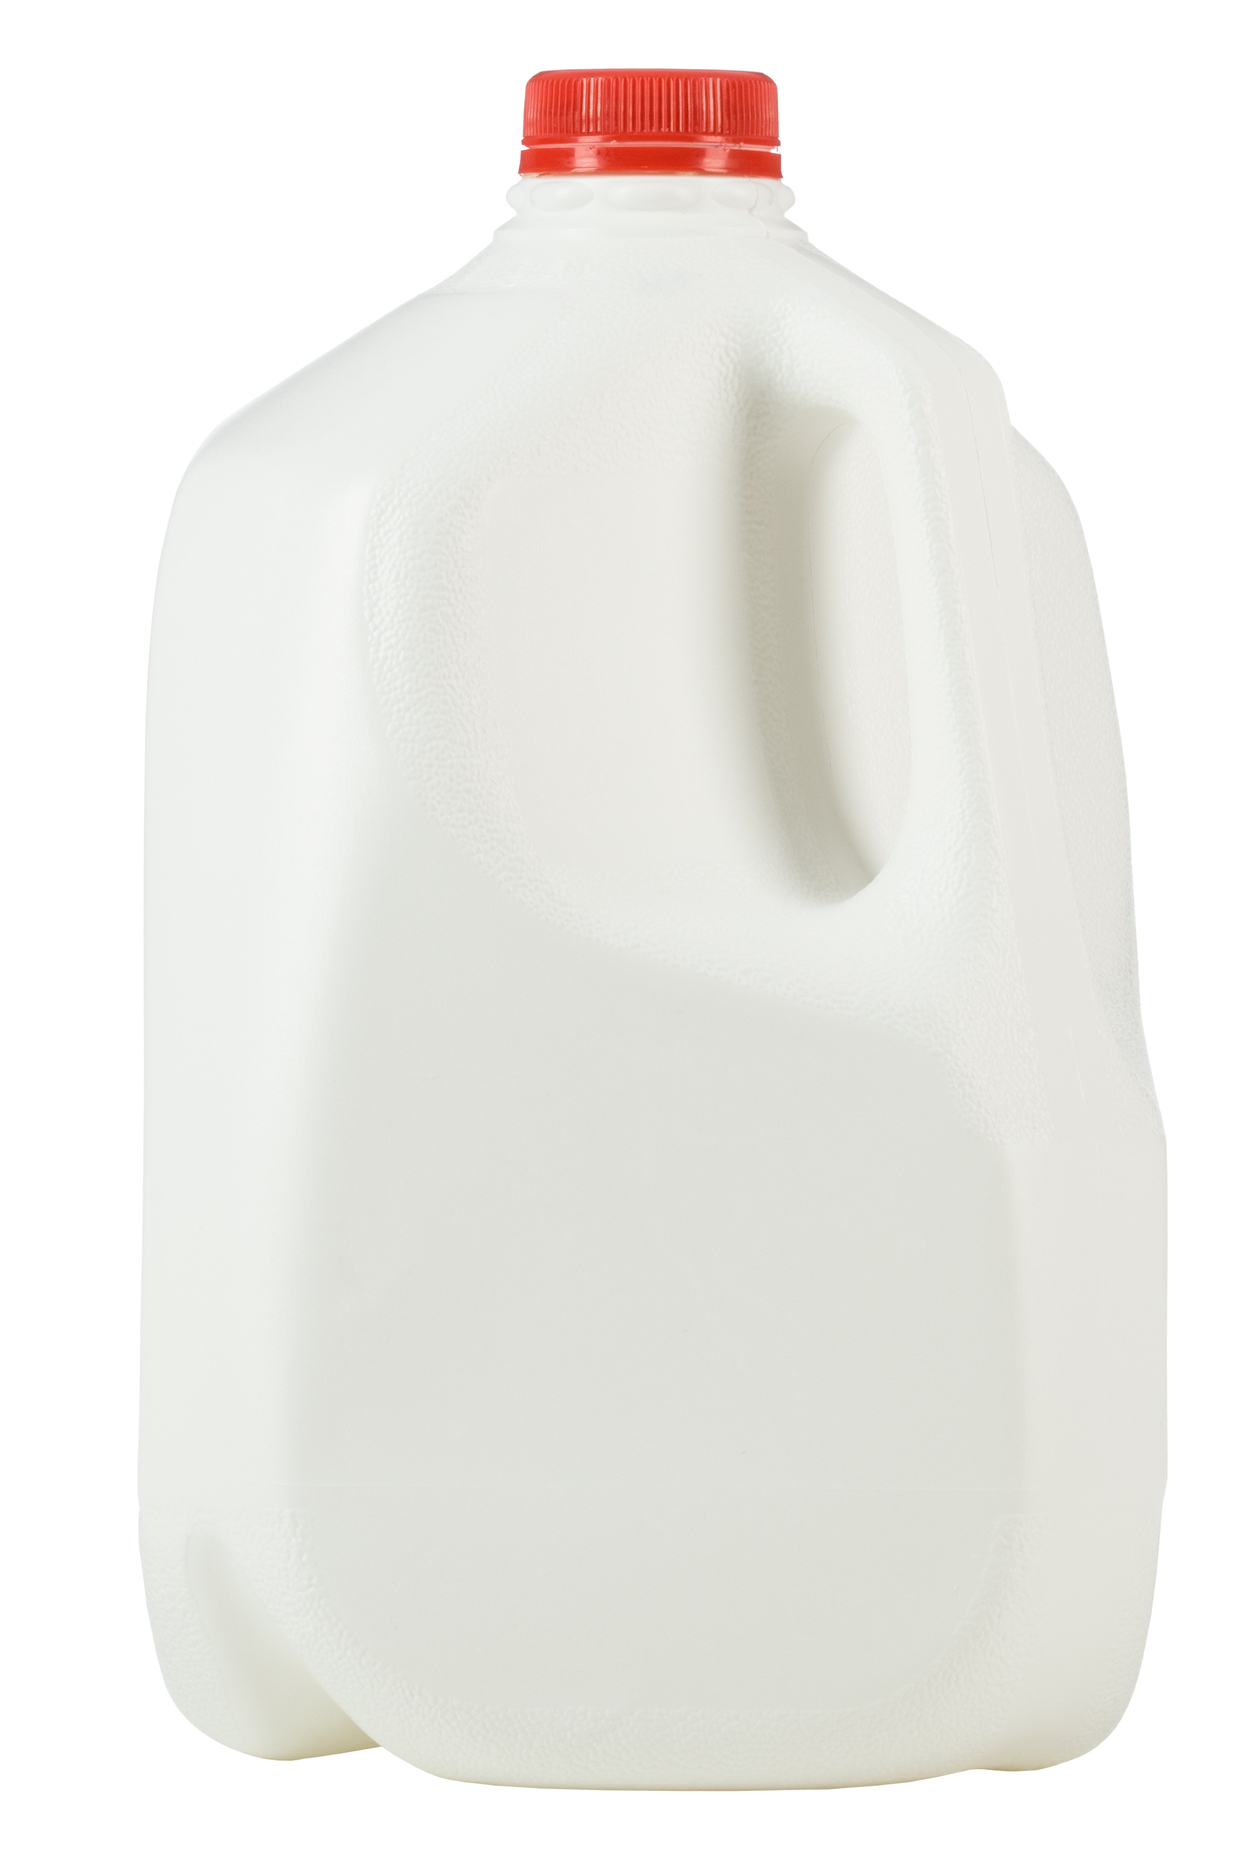 An image of whole milk.